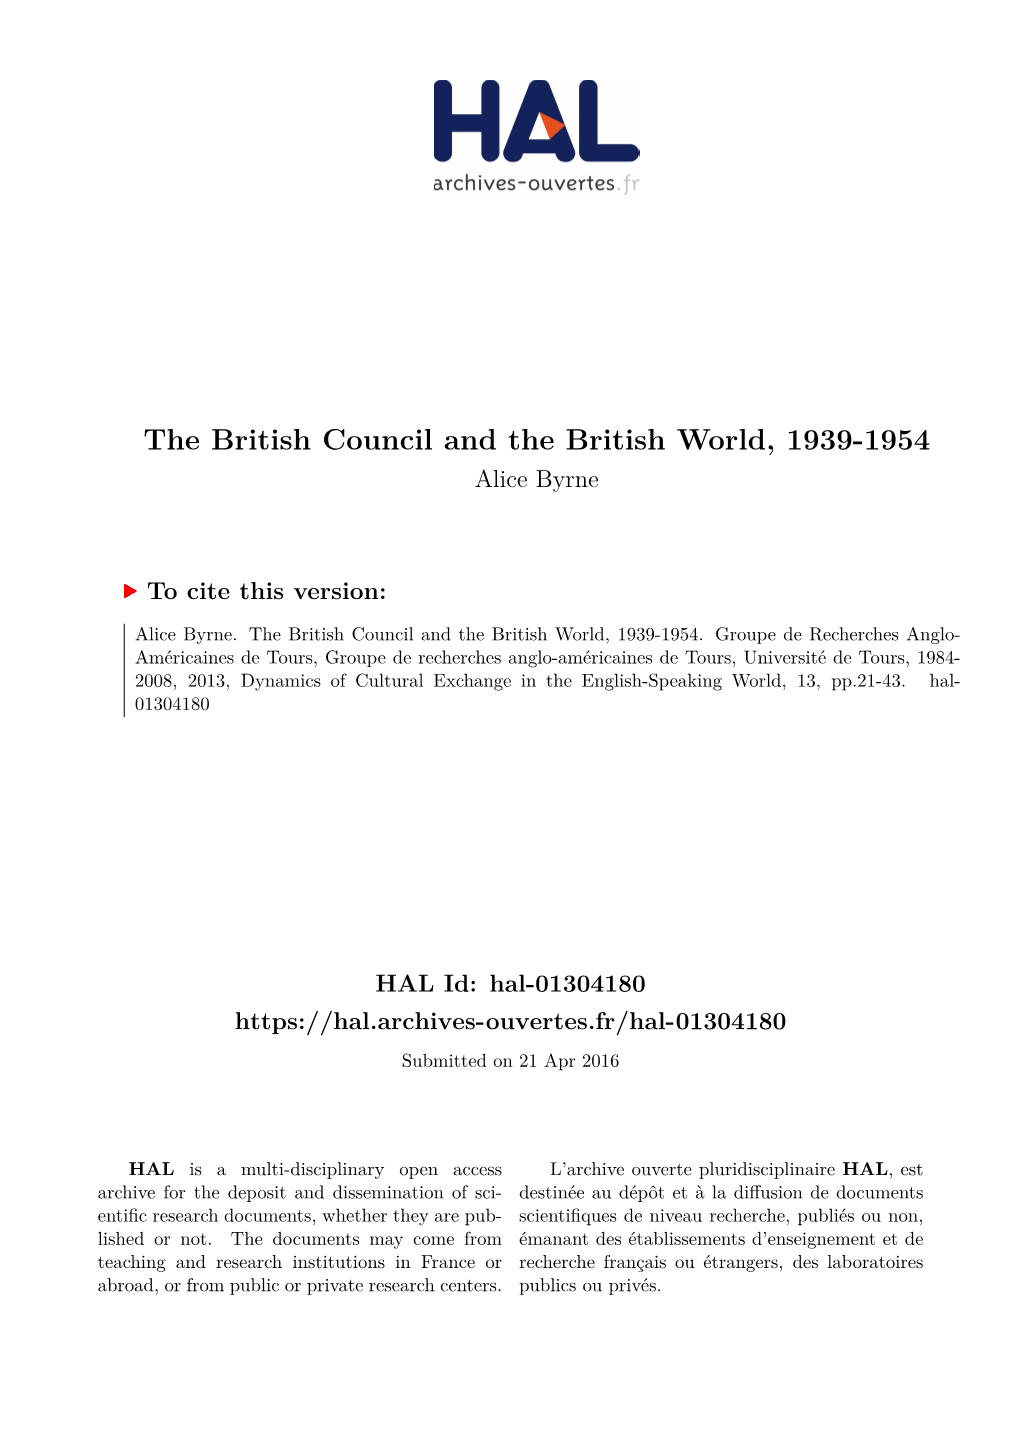 The British Council and the British World, 1939-1954 Alice Byrne